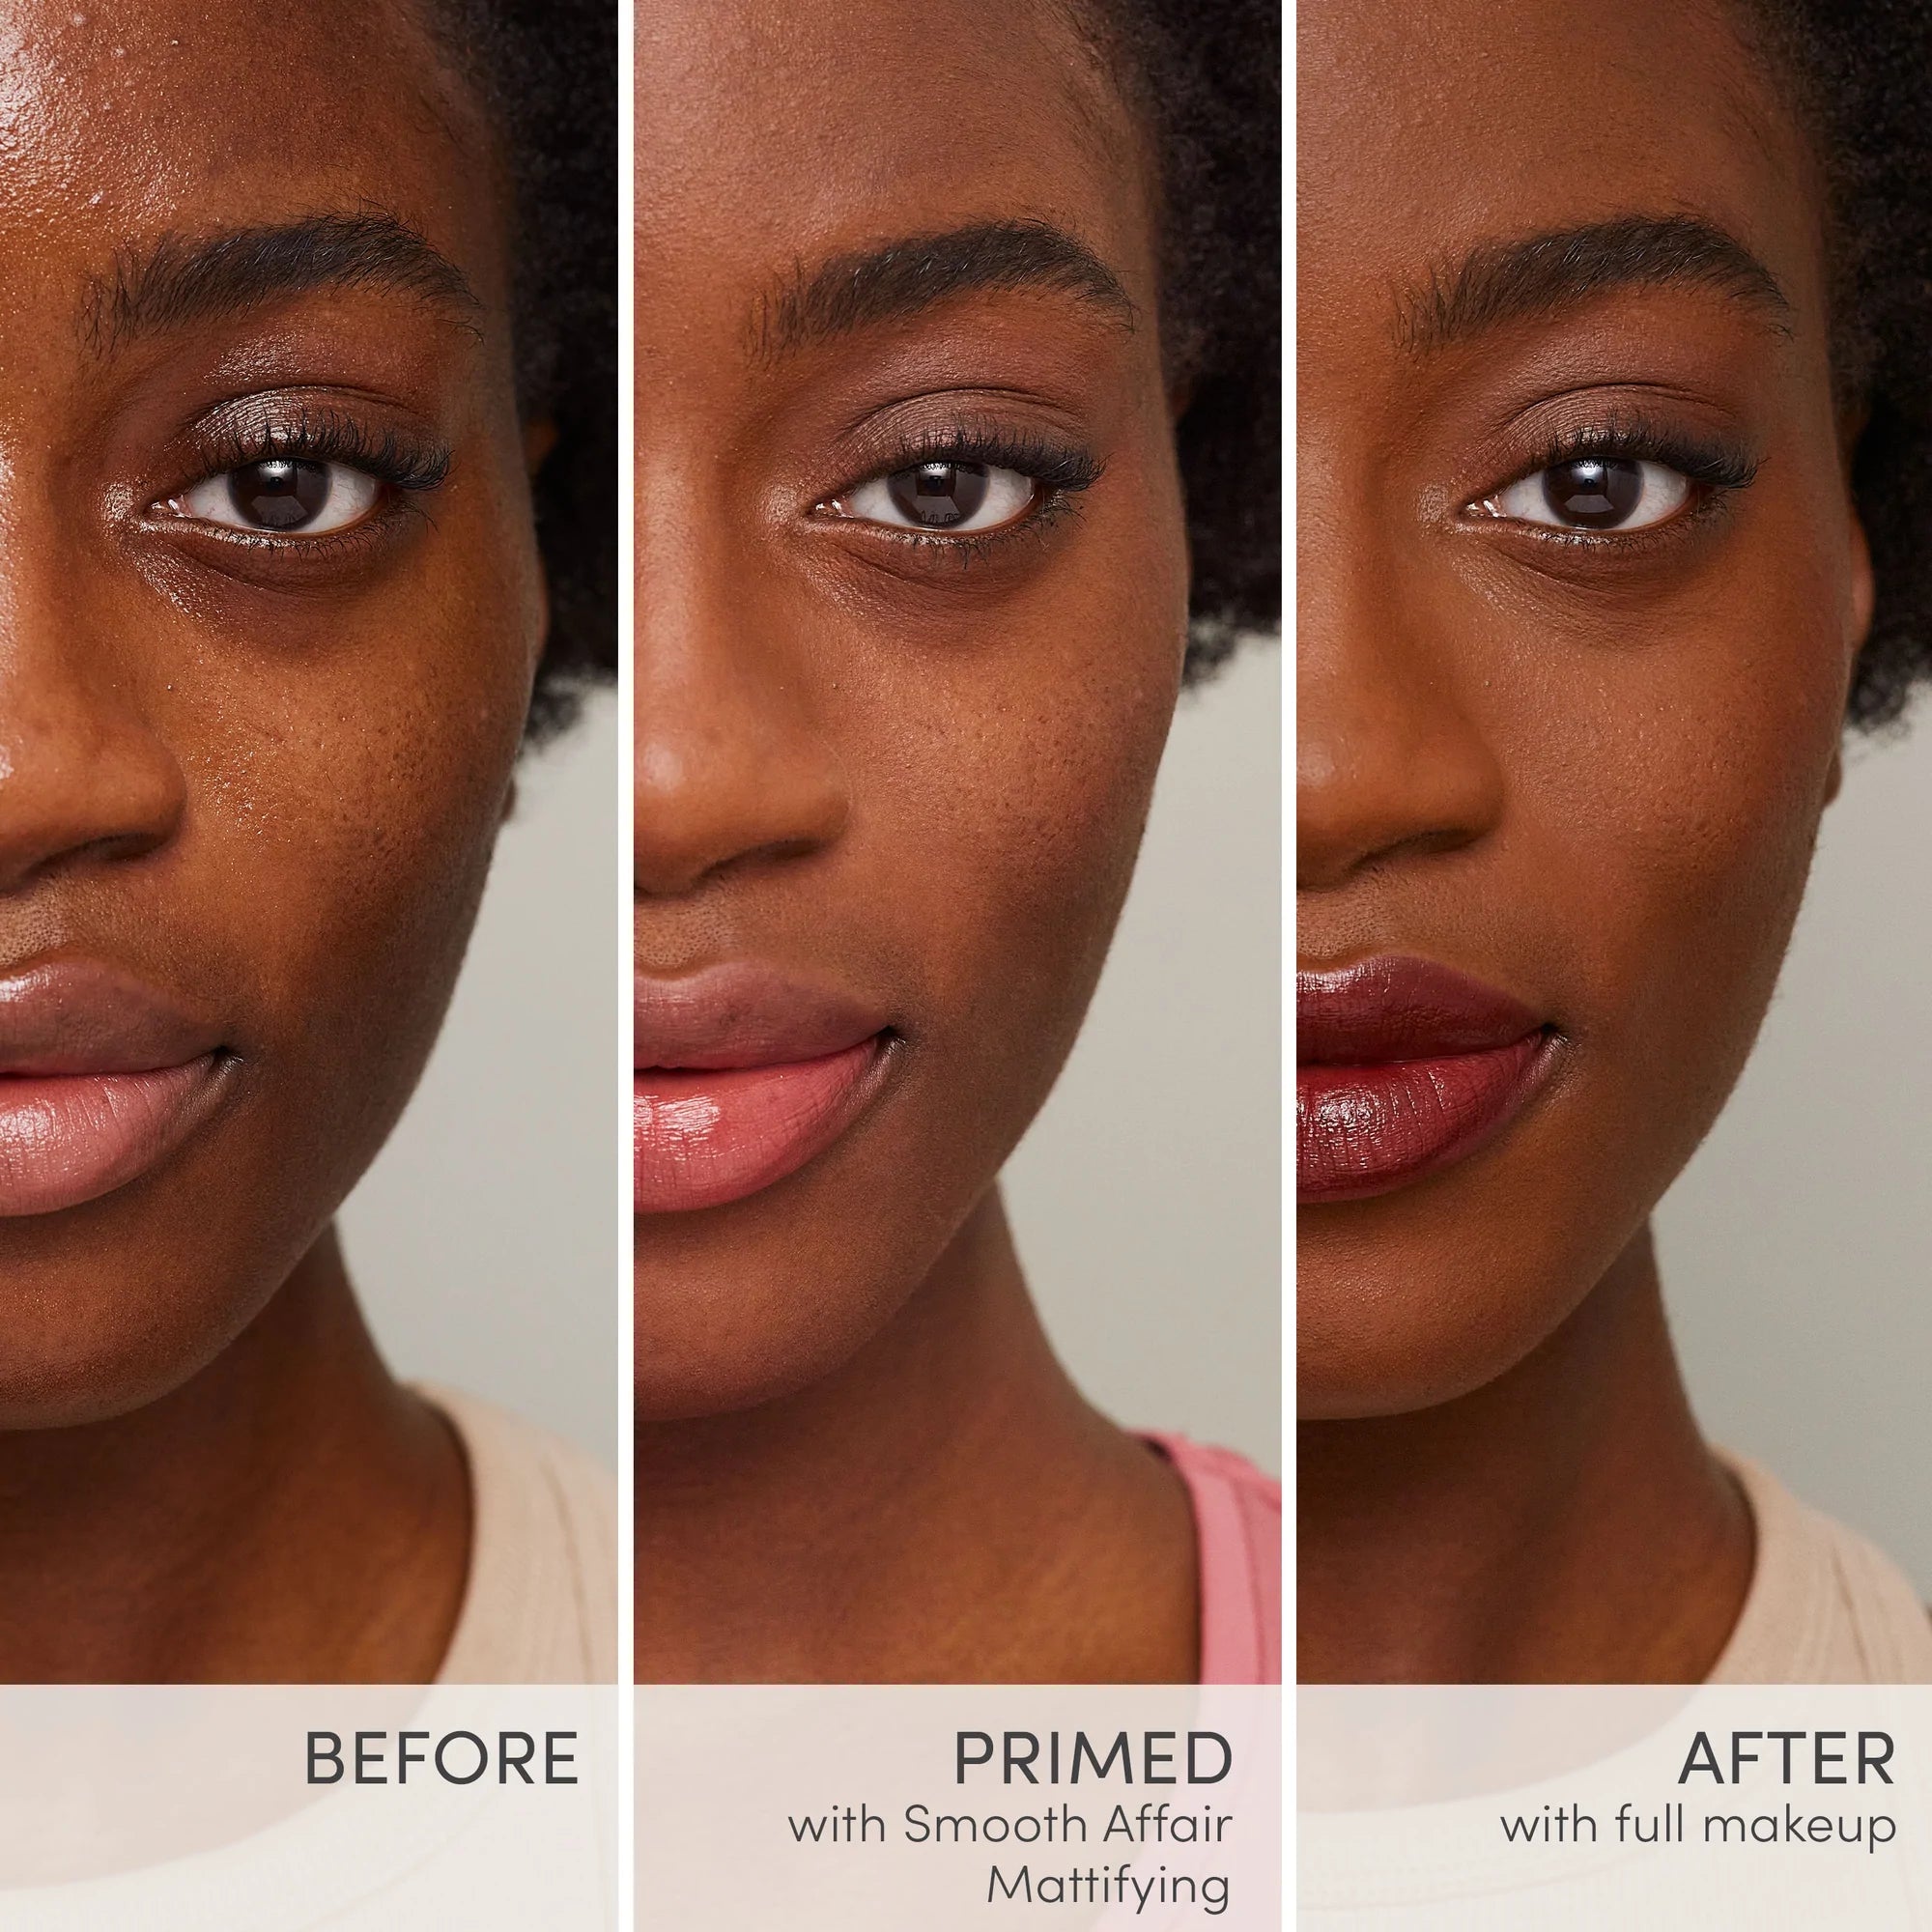 Smooth Affair® Mattifying Face Primer before, primed and after shot